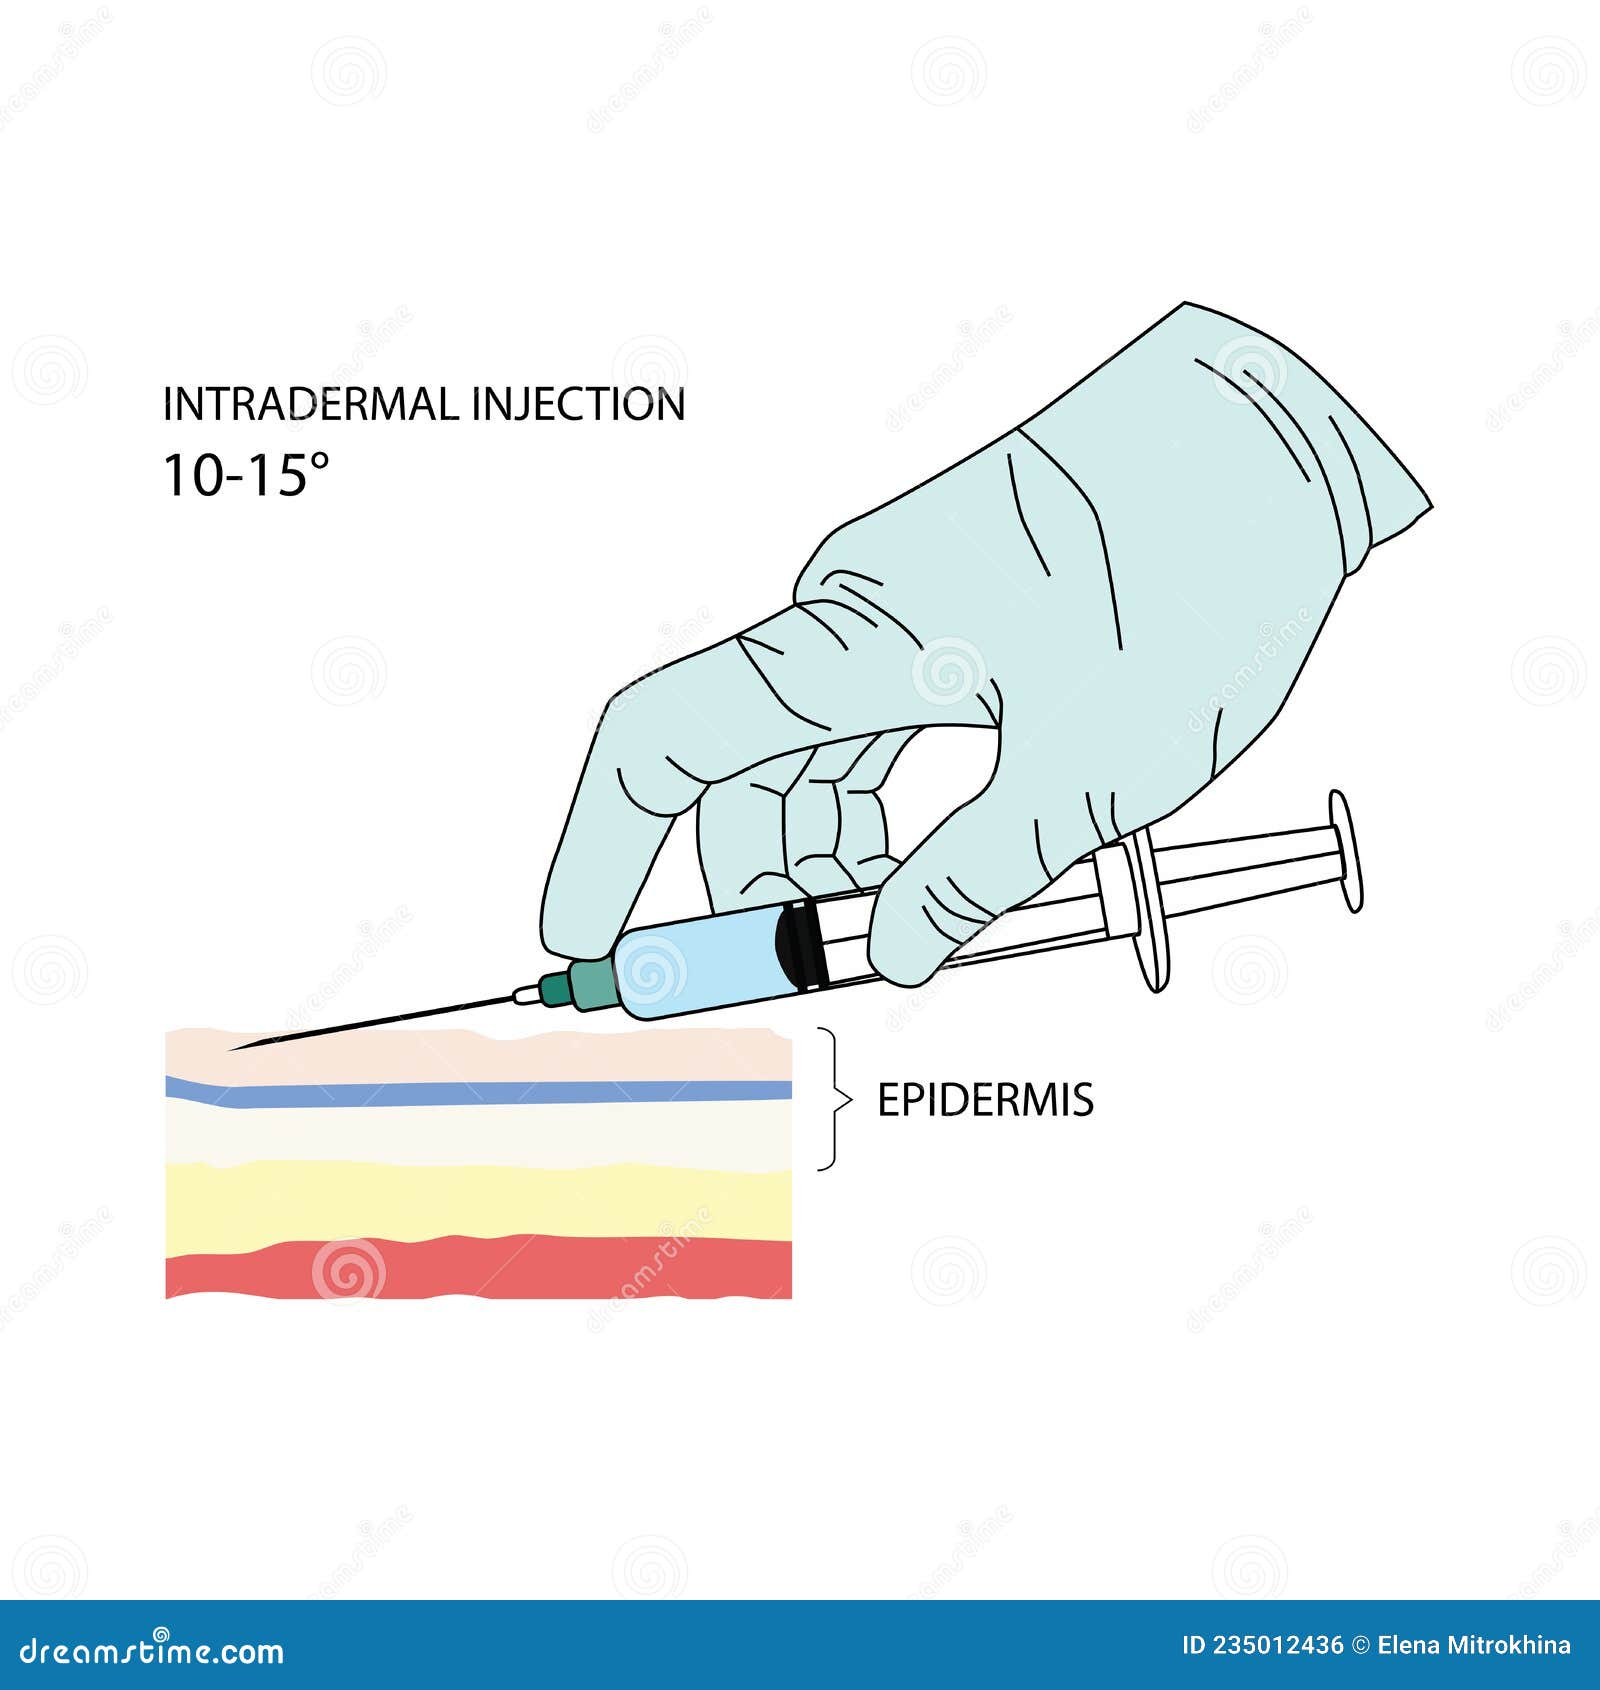 intradermal injection. effective methods of administration of drugs and other medical solutions that are used.